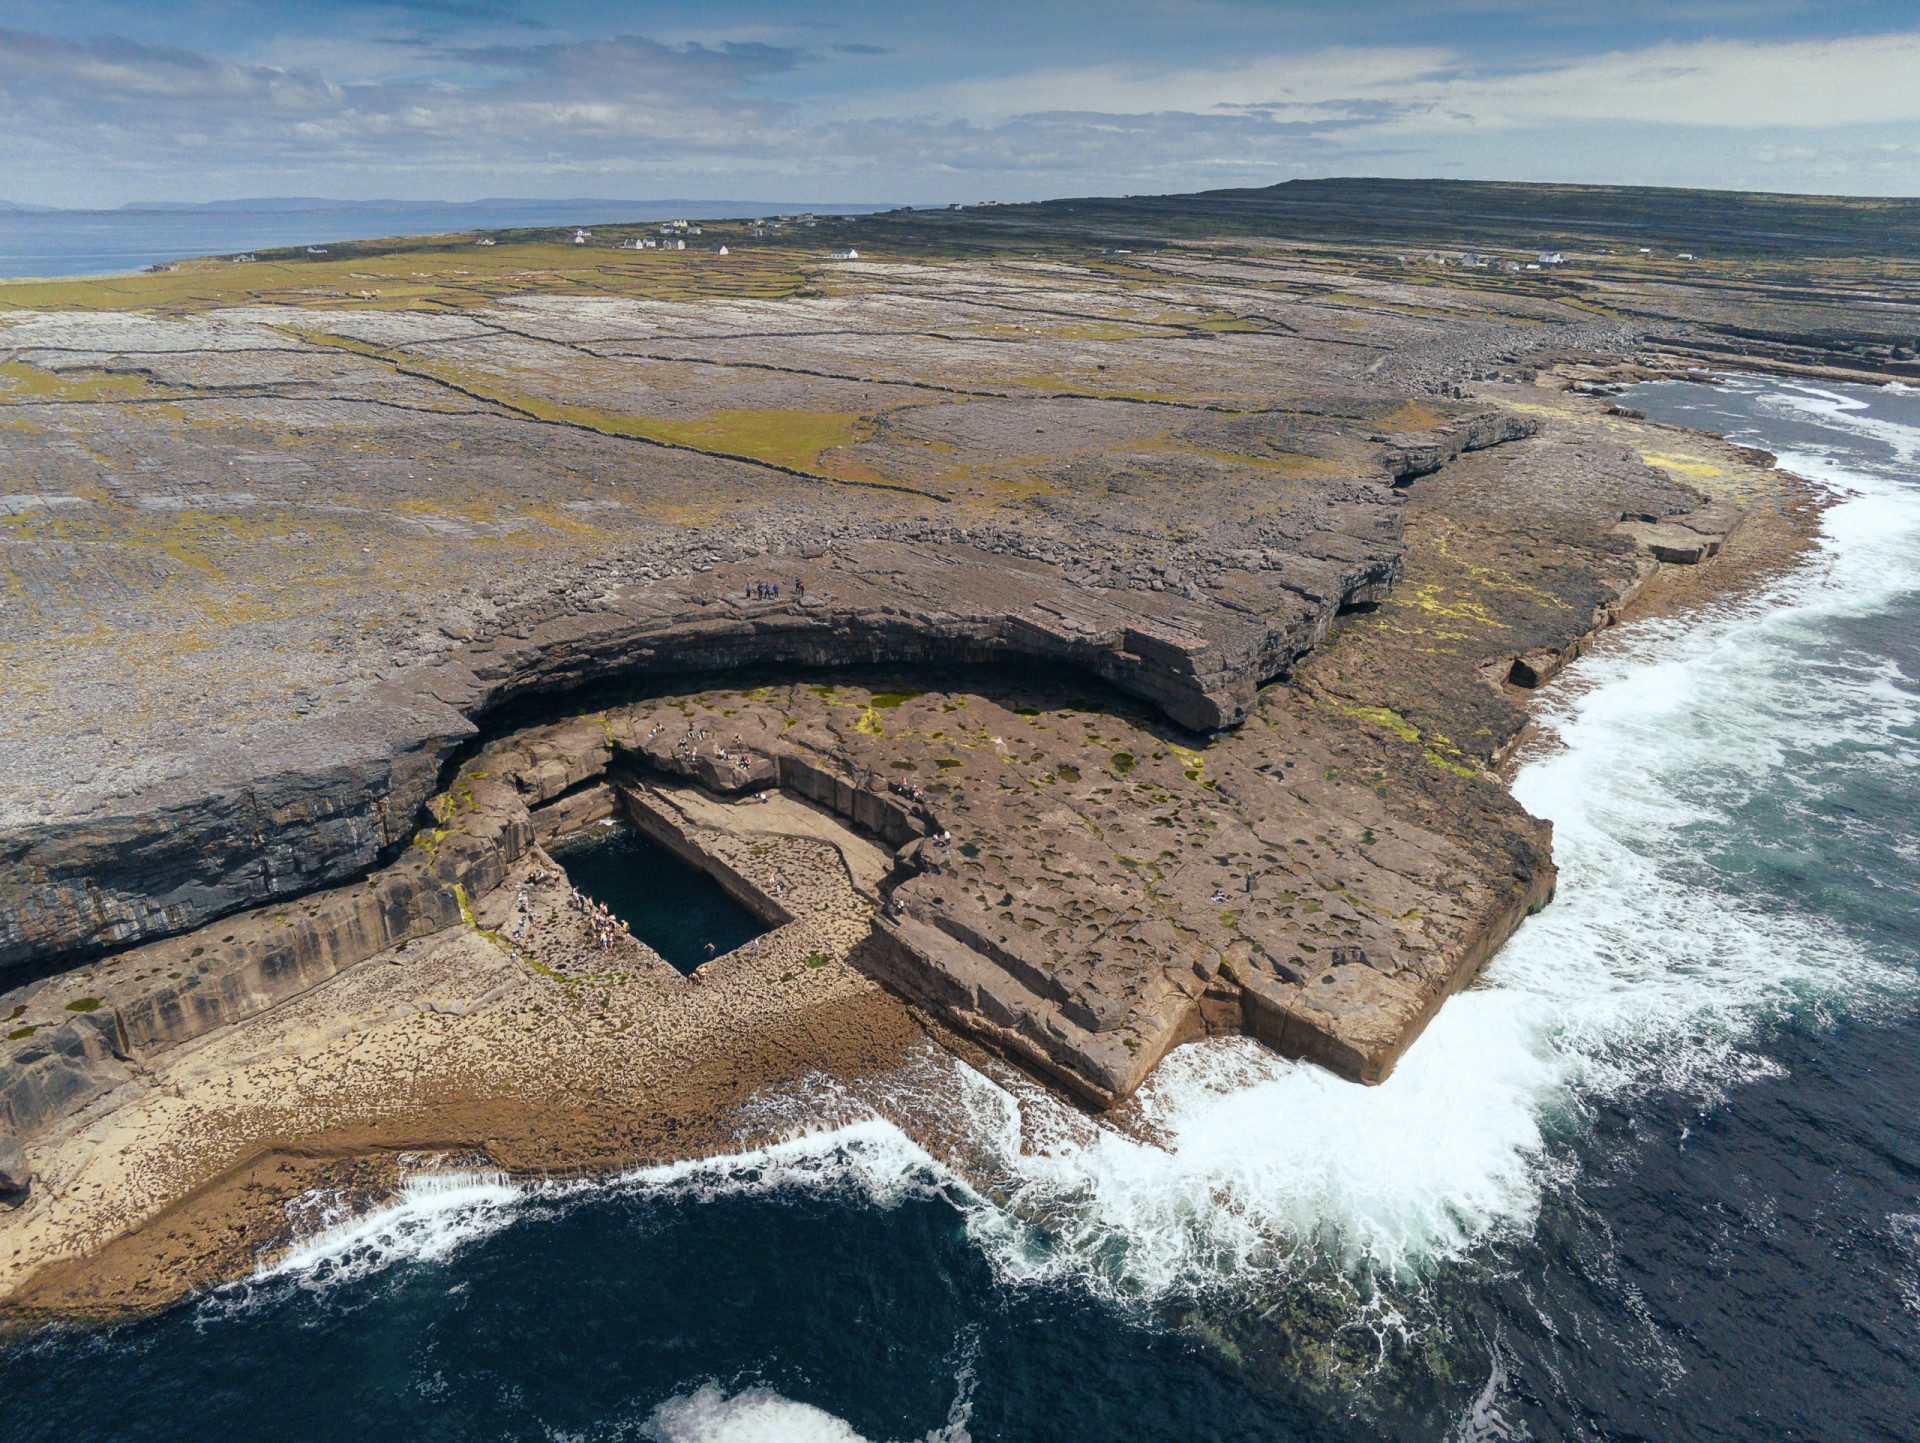 <p>A set of three islands off the coast of County Galway, the Aran Islands are known for their ancient sites such as the fort of Dún Aonghasa (pictured) on Inishmore.</p>